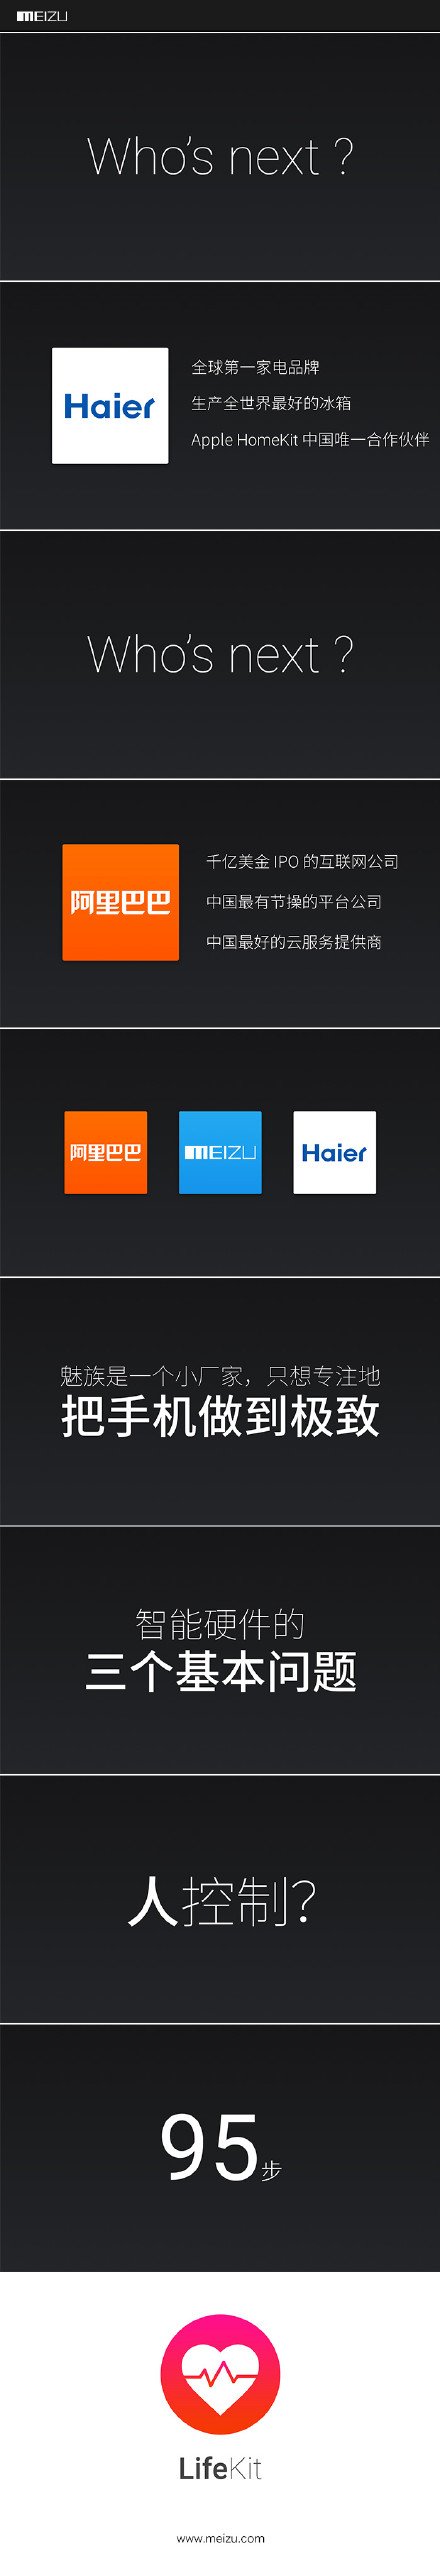 Meizu Connected